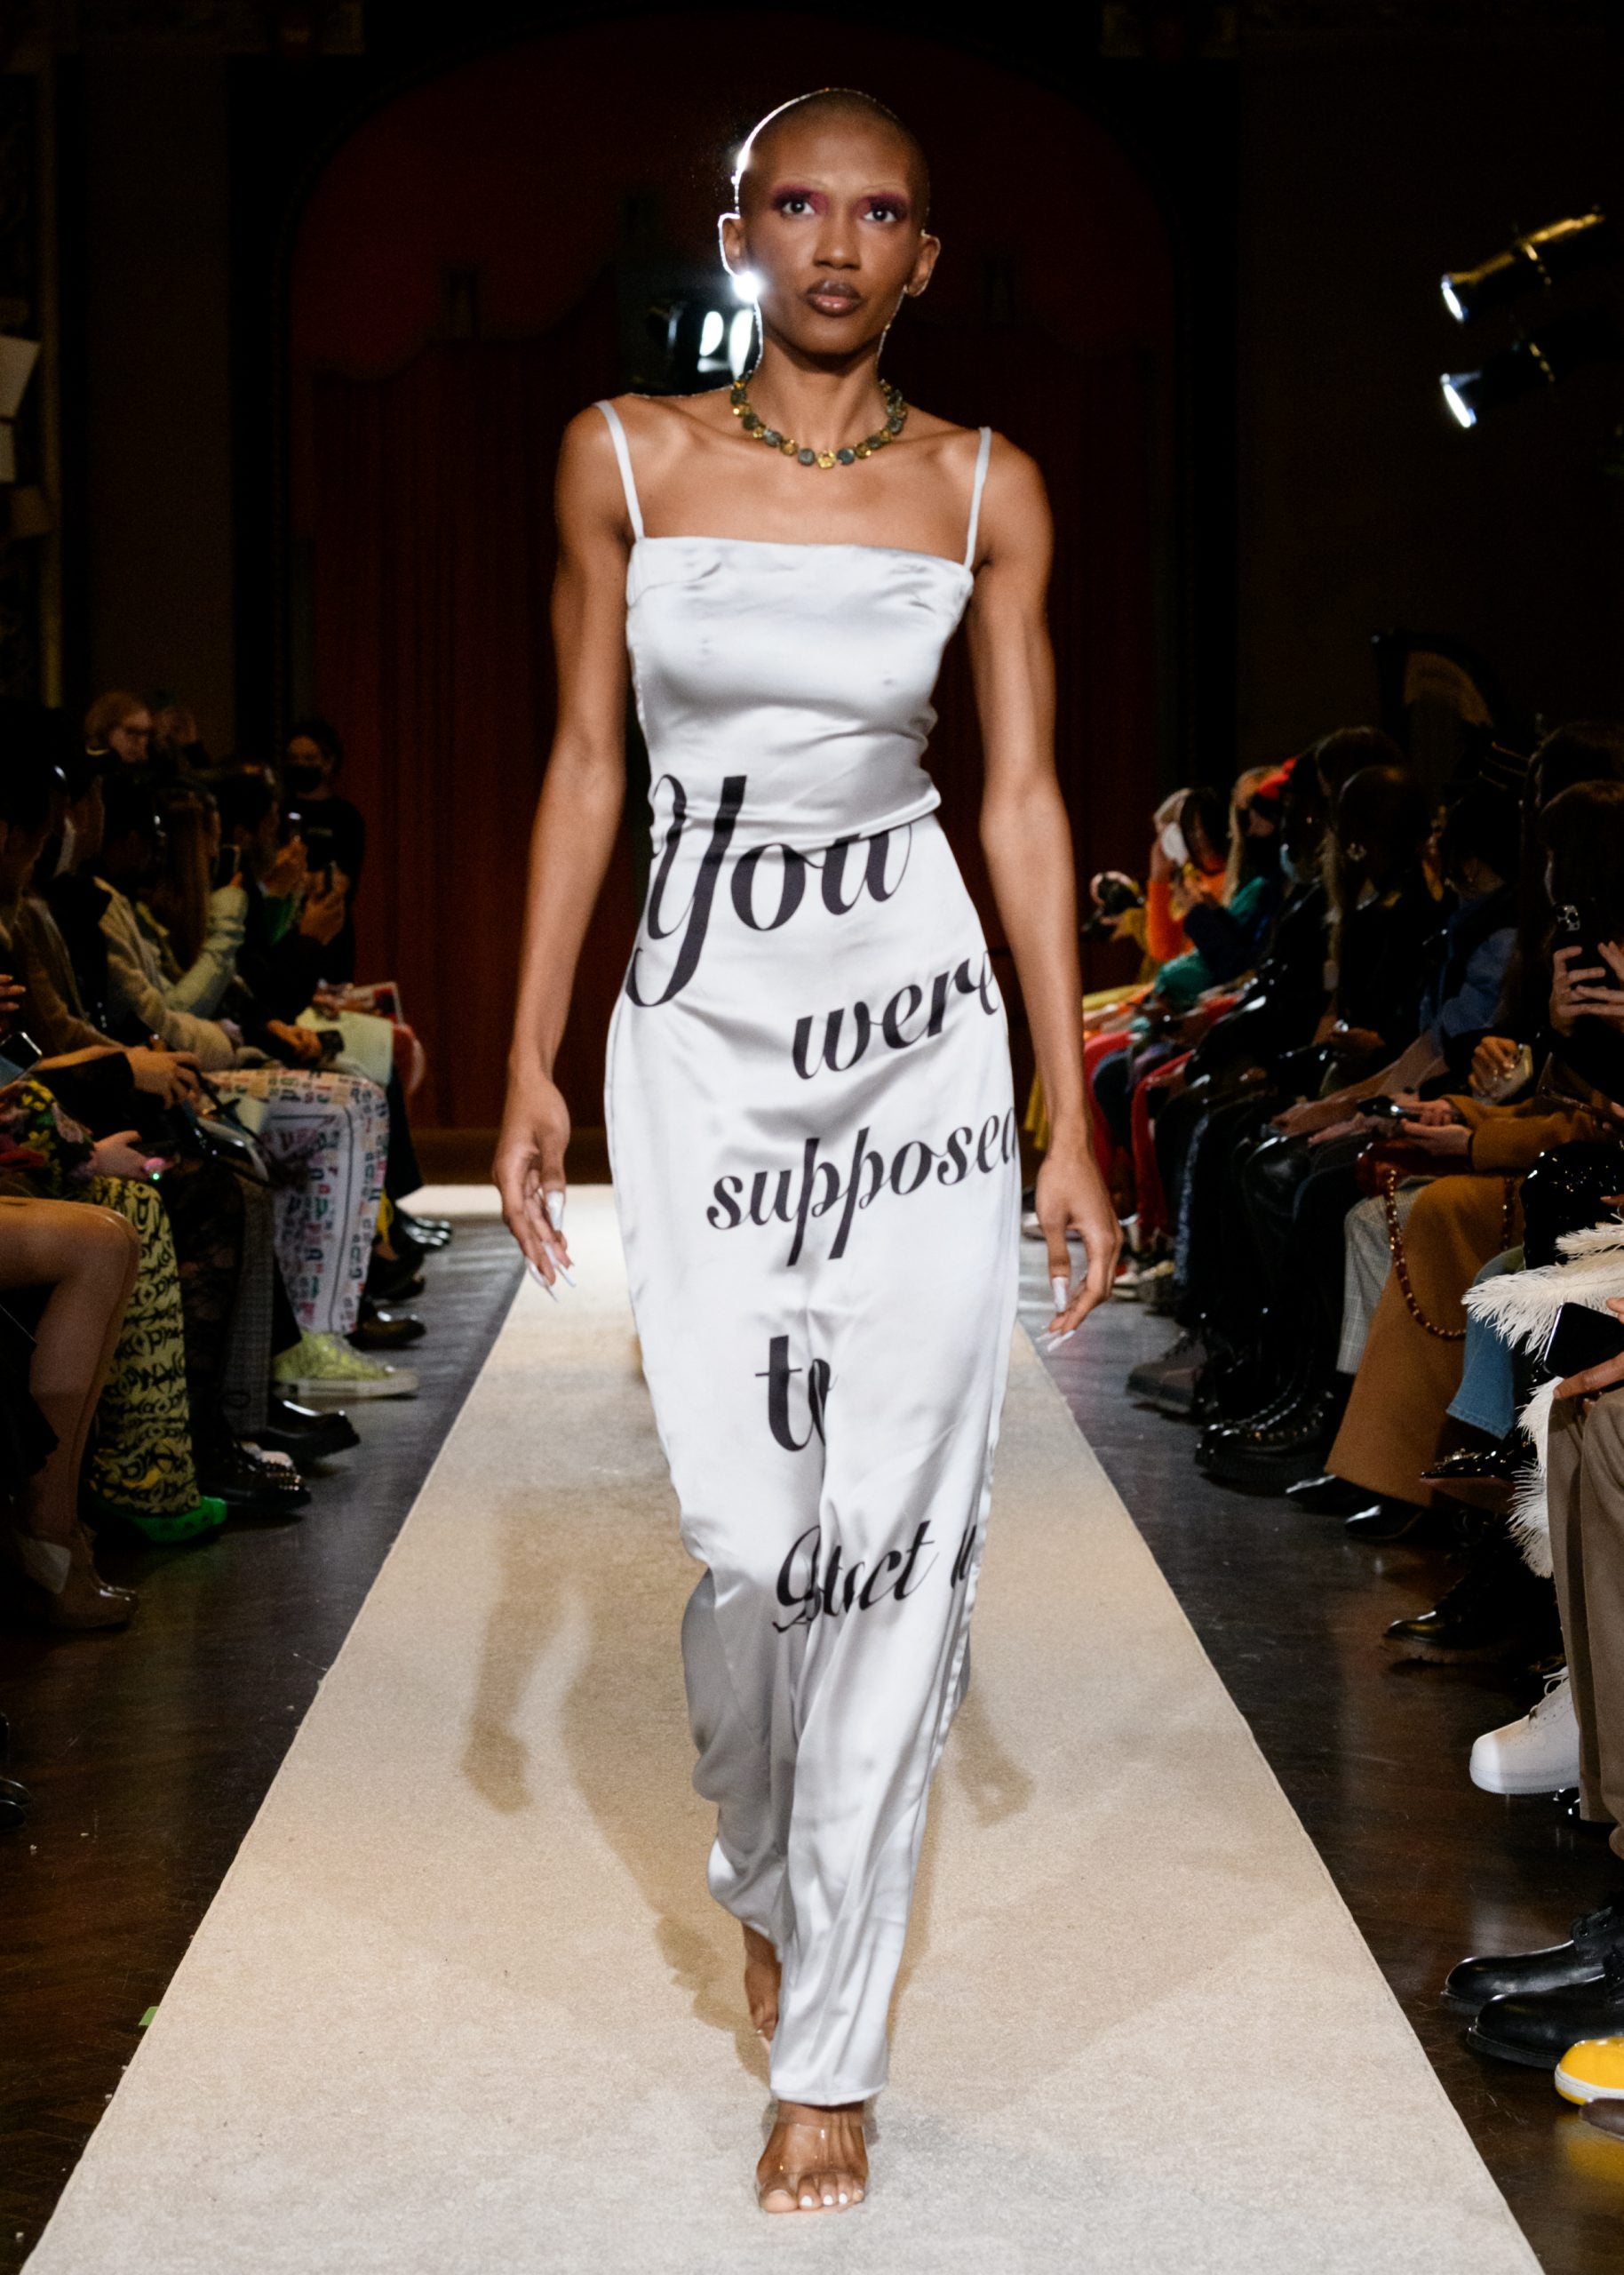 Tia Adeola Returns To NYFW With Menswear And An Unreleased Single From Flo Milli